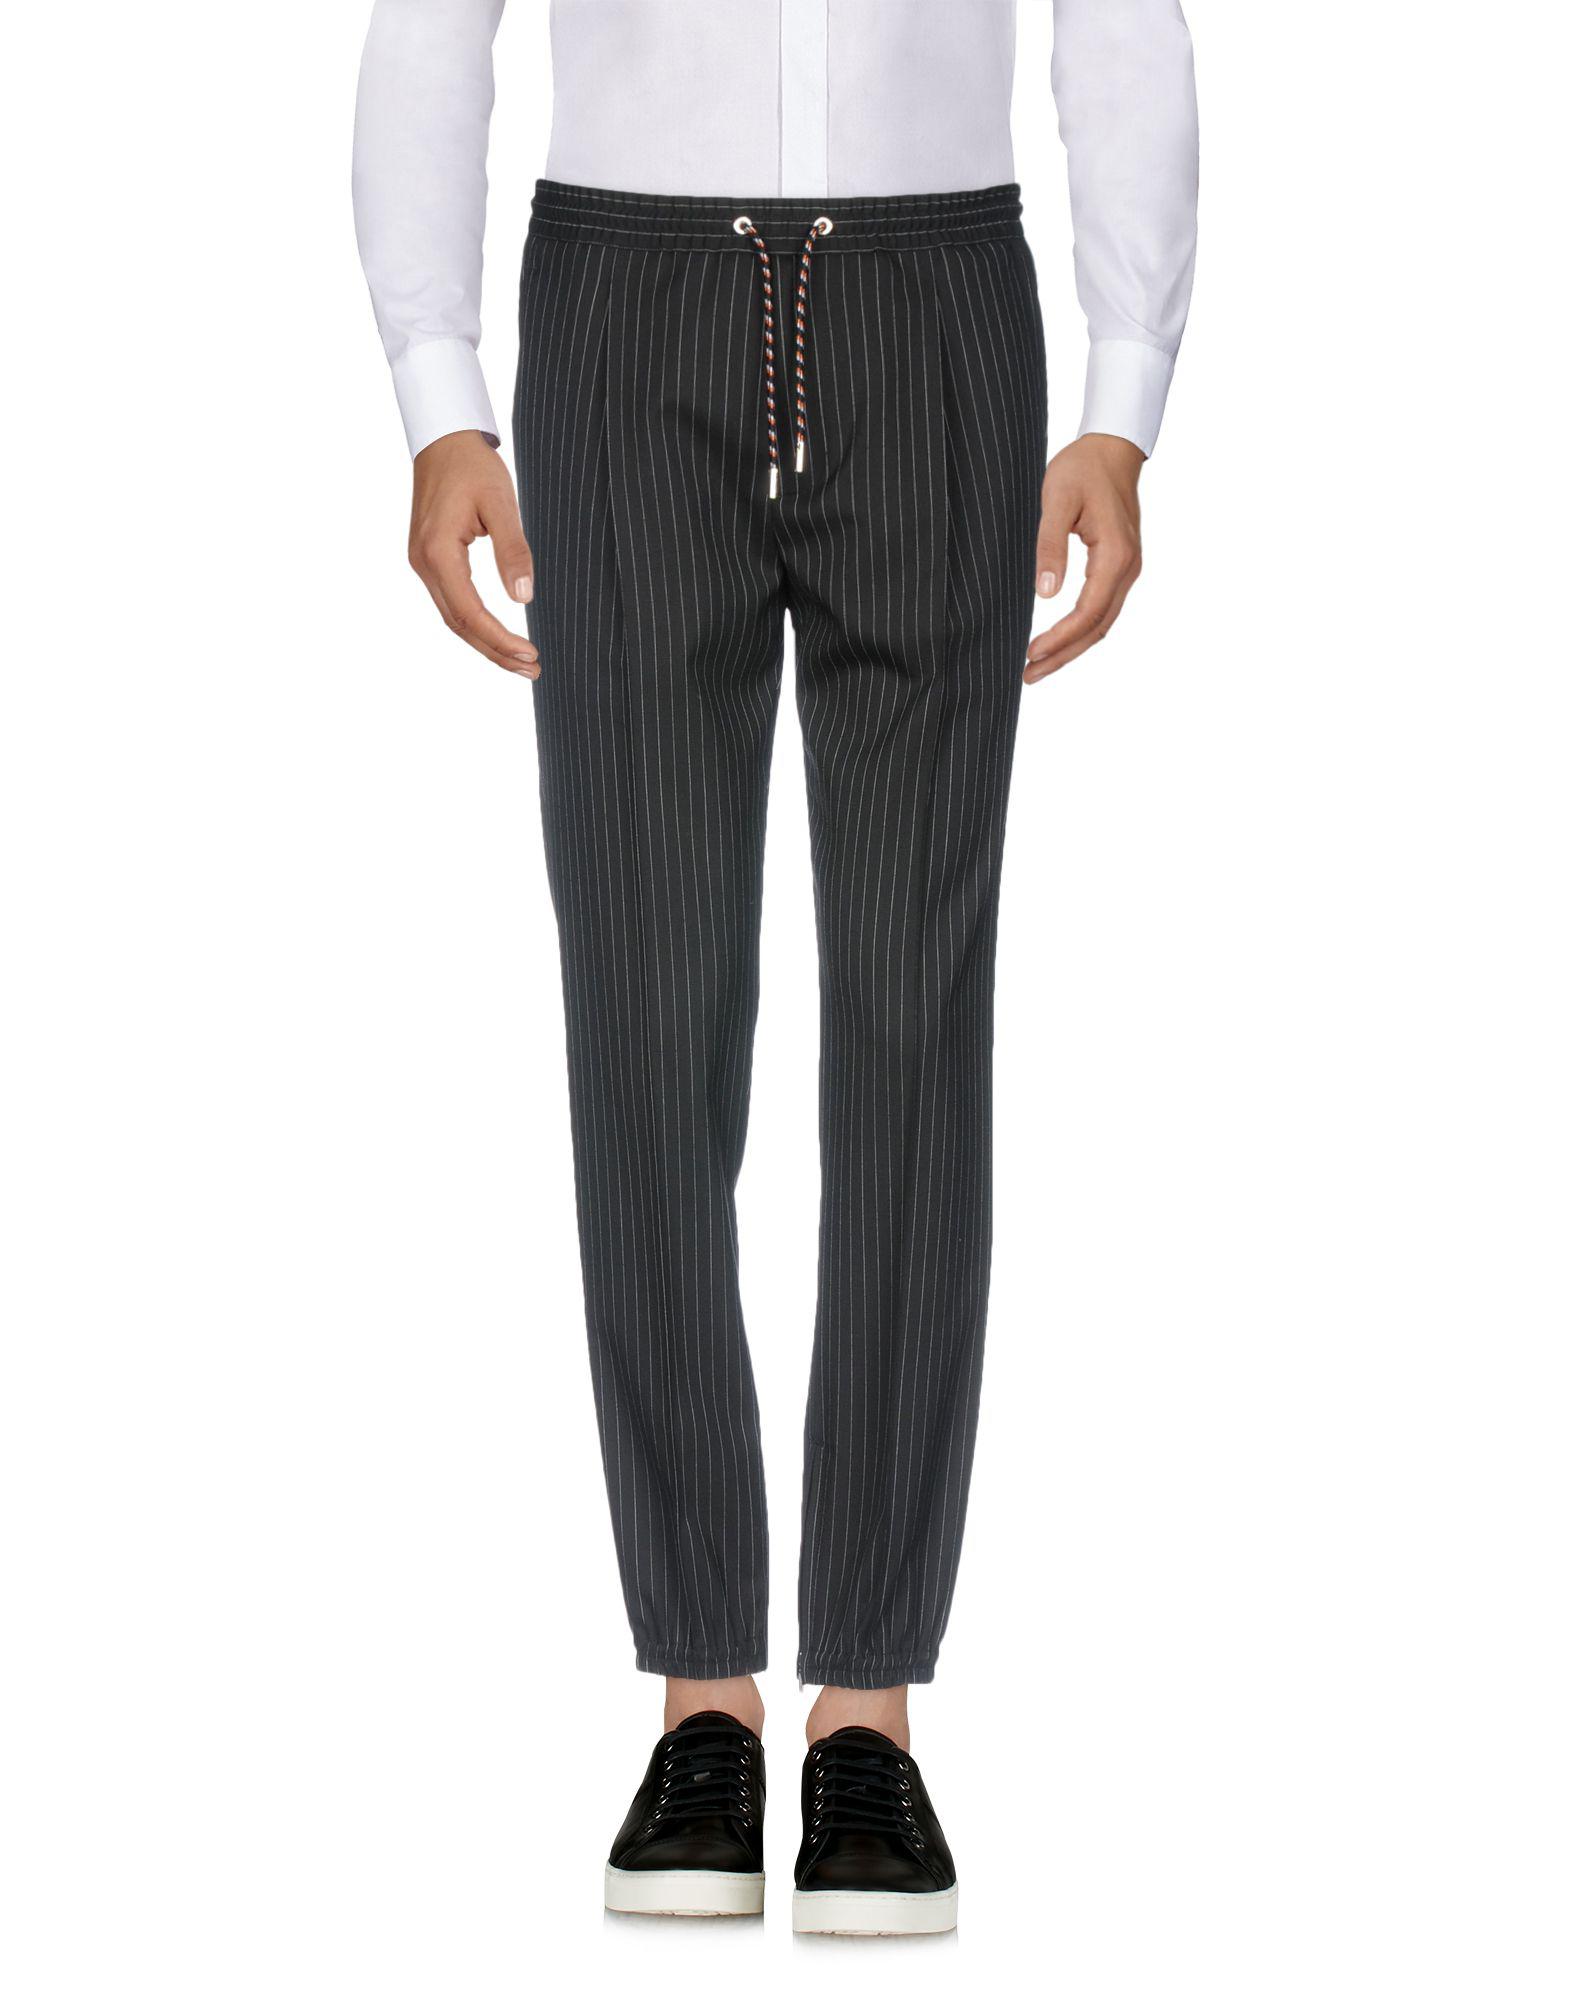 Dior Homme Wool Casual Trouser in Black for Men - Lyst